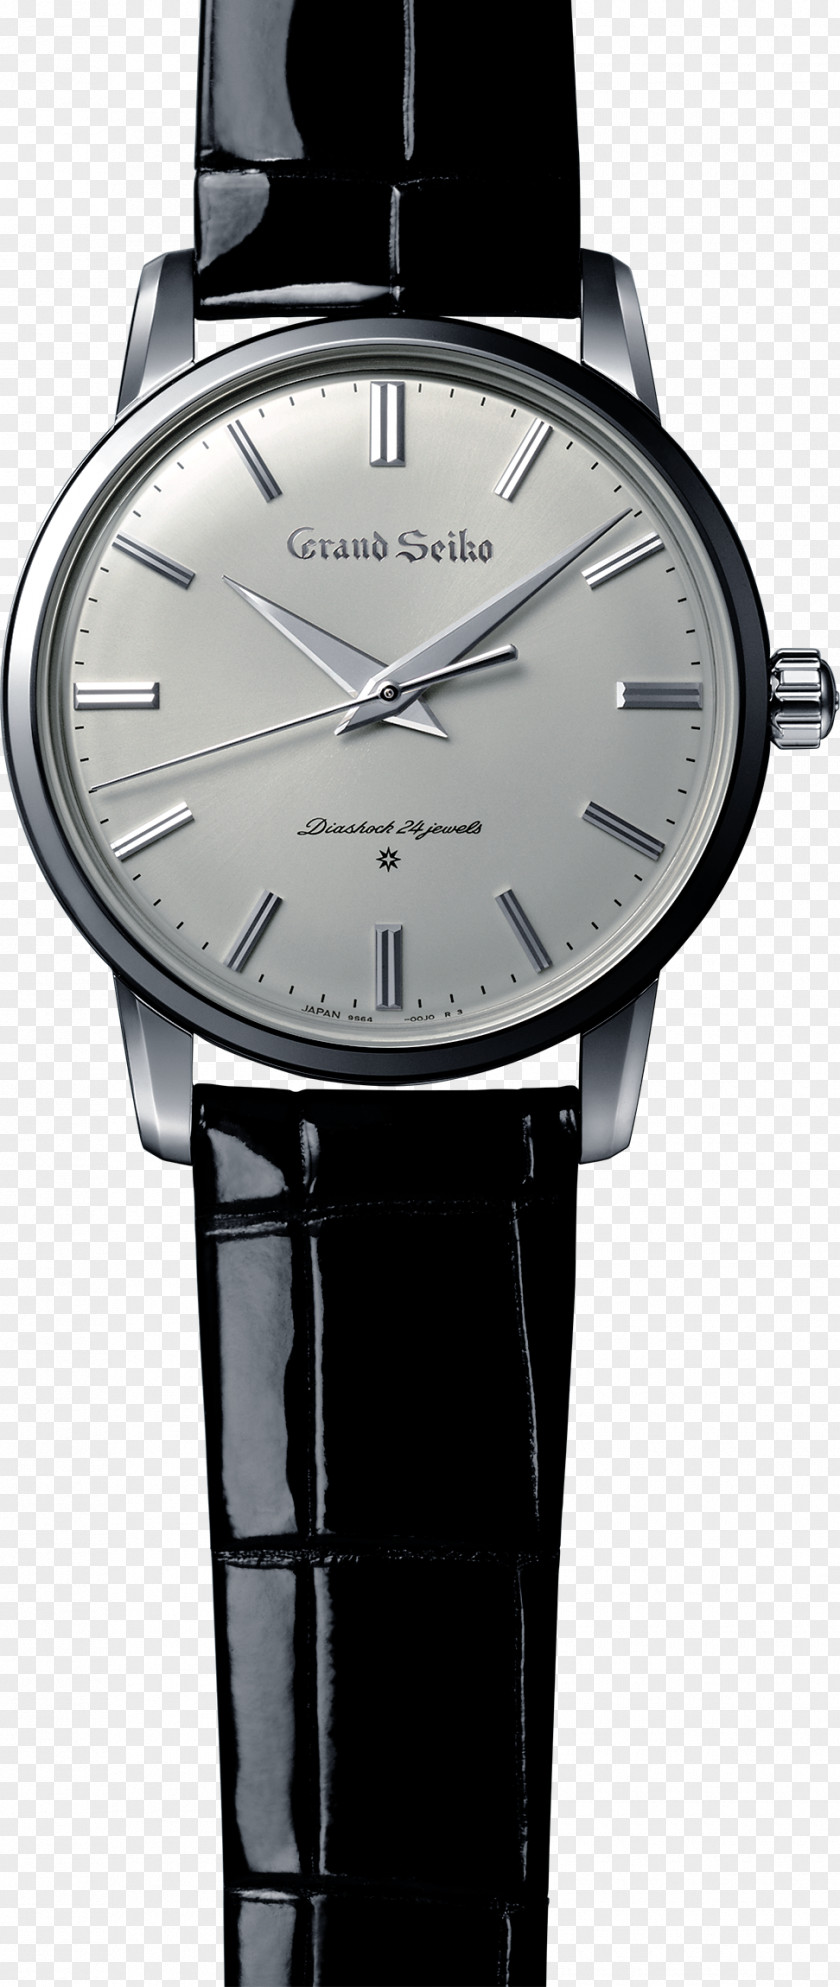 Watch WatchTime Baselworld Grand Seiko PNG